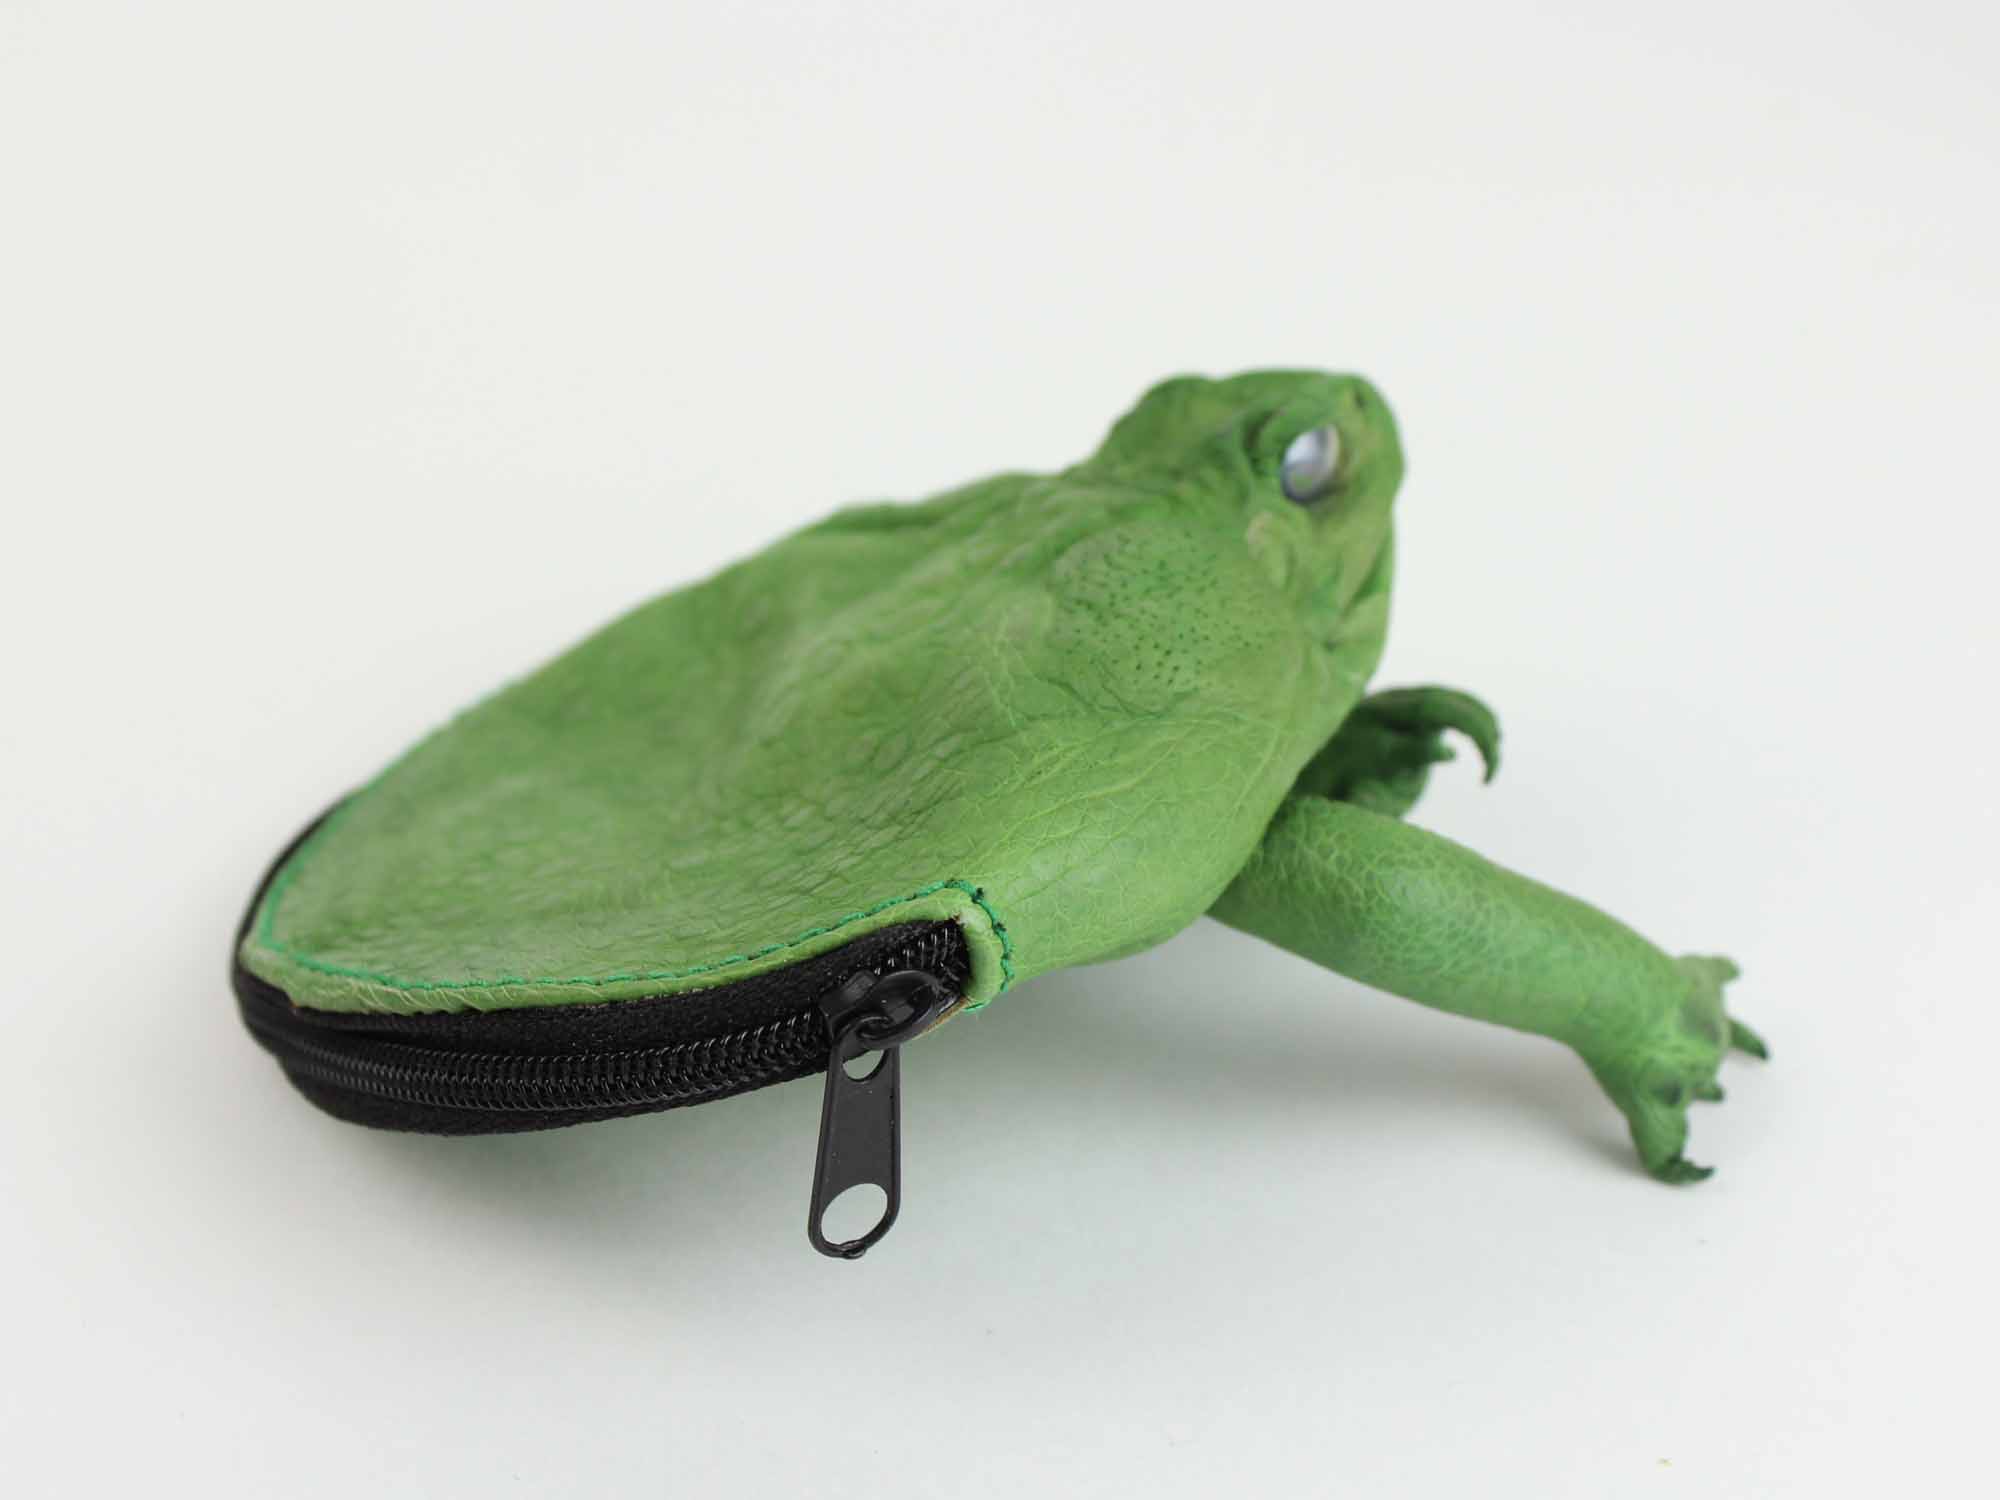 10 REAL FROG/TOAD purses w/sling. Wholesale. leather coin bags gag Unique  gift.. $157.89 - PicClick